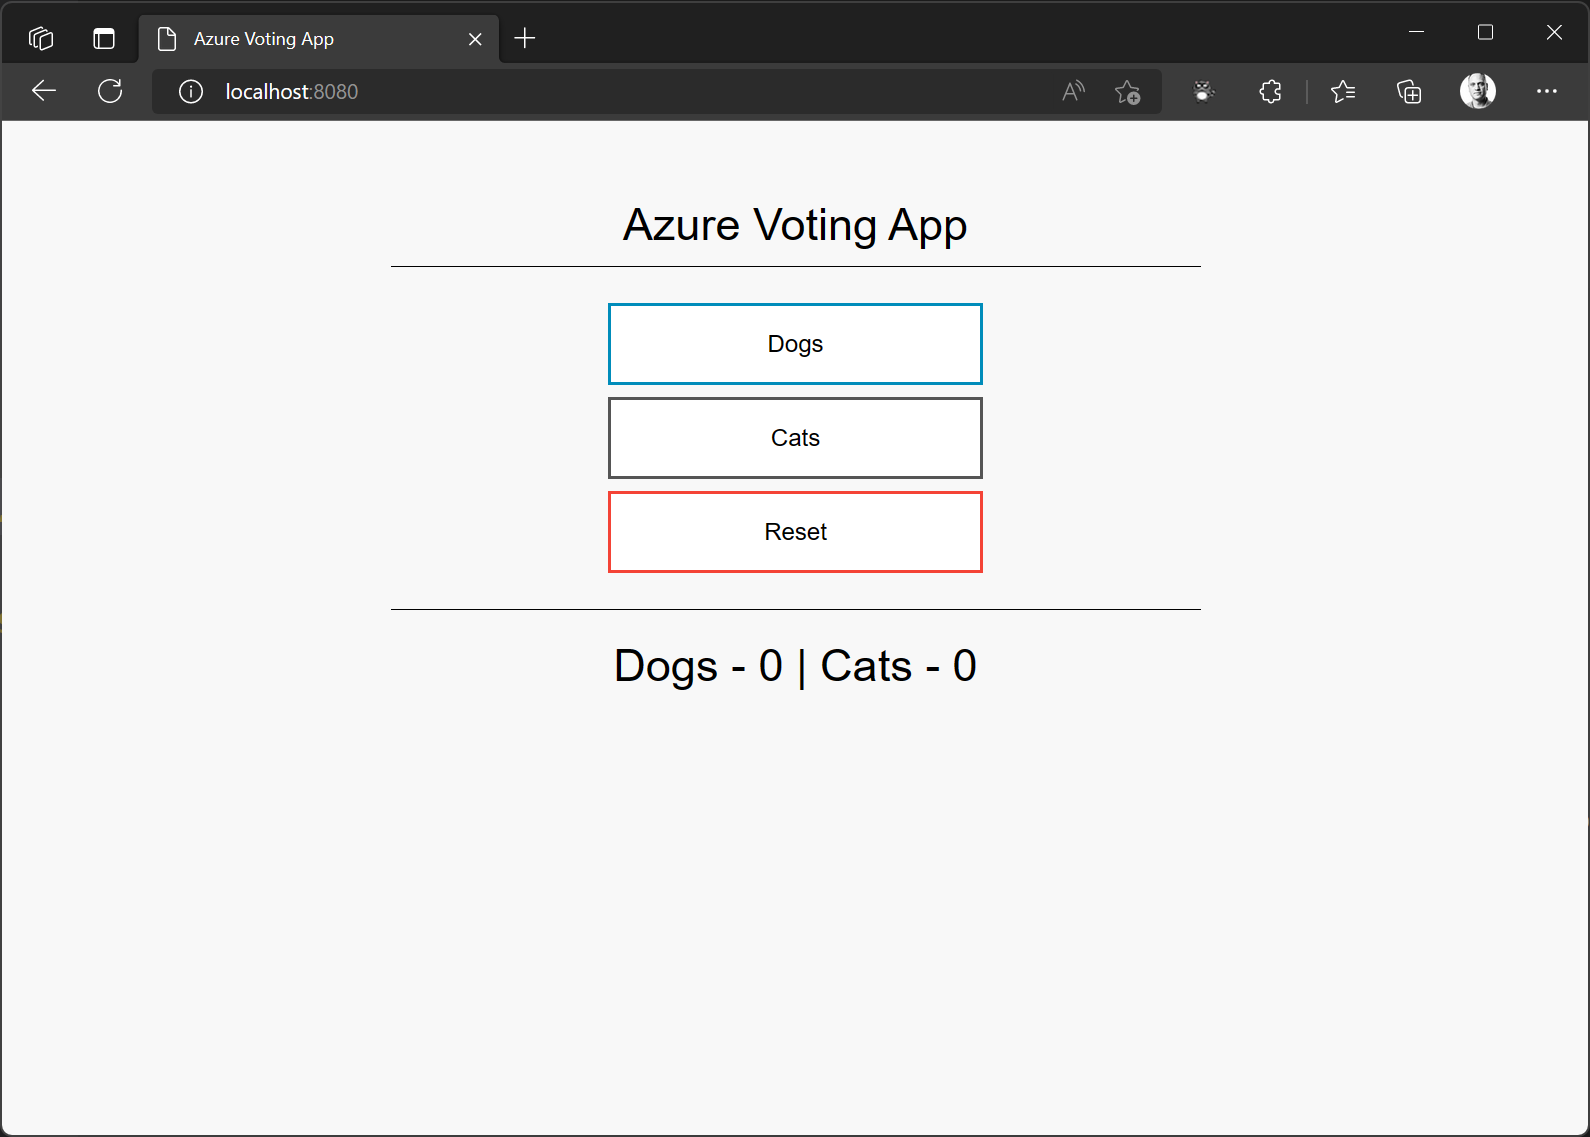 Azure voting website in a browser with three buttons, one for Dogs, one for Cats, and one for Reset.  The counter is Dogs - 0 and Cats - 0.